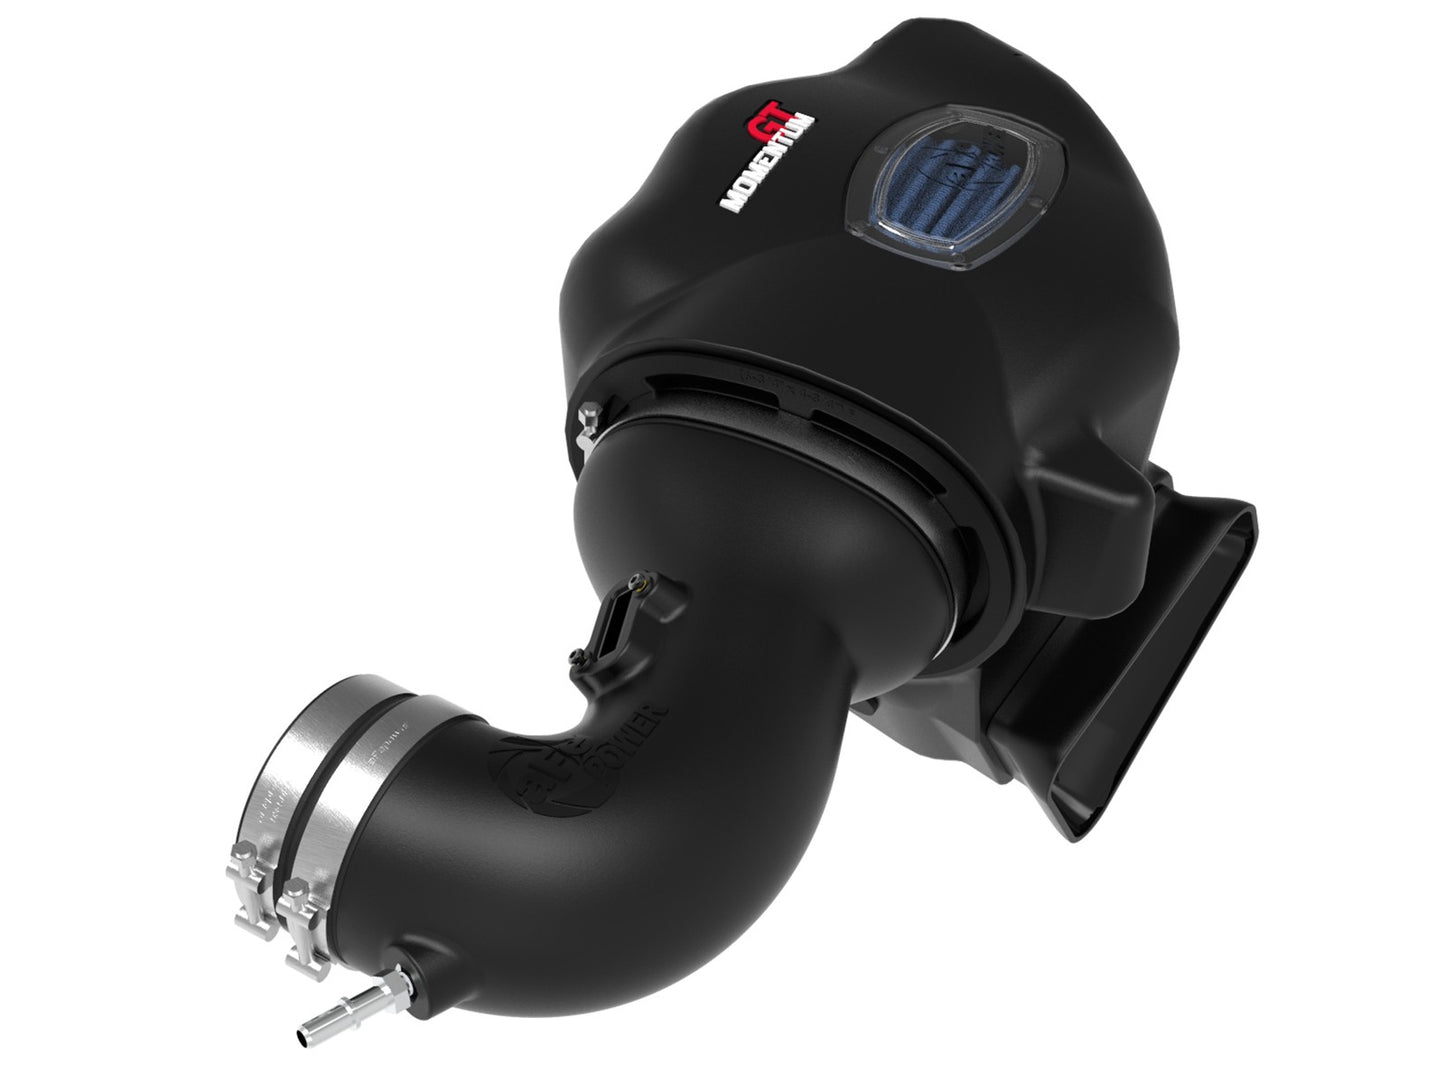 Momentum GT Cold Air Intake System w/Pro 5R Filter Media